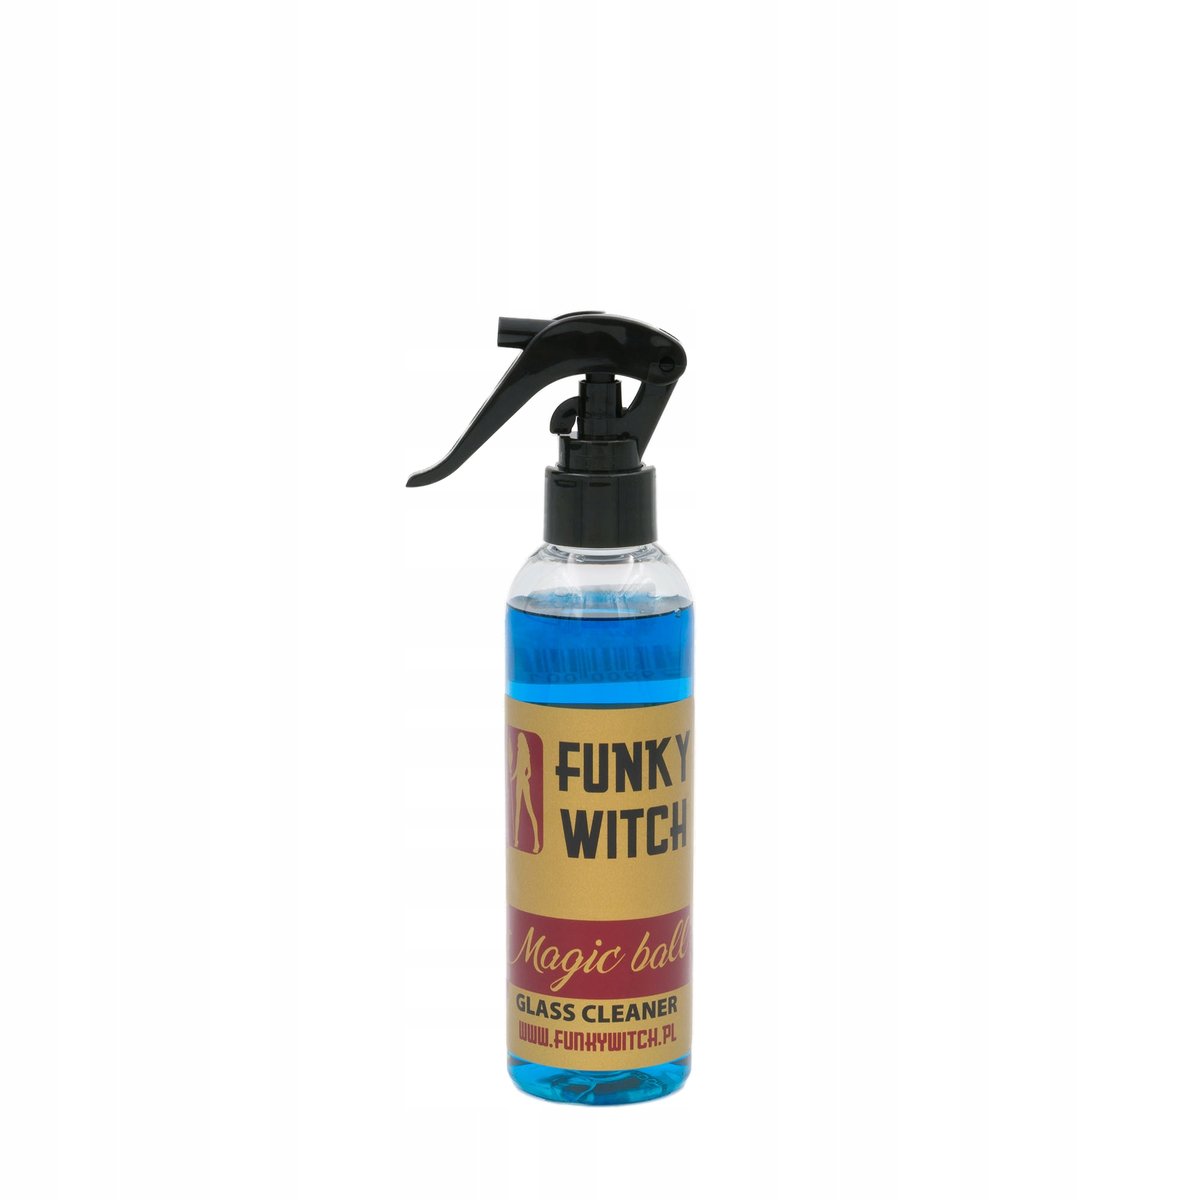 Funky Witch Magic Ball Glass Cleaner 0,215L